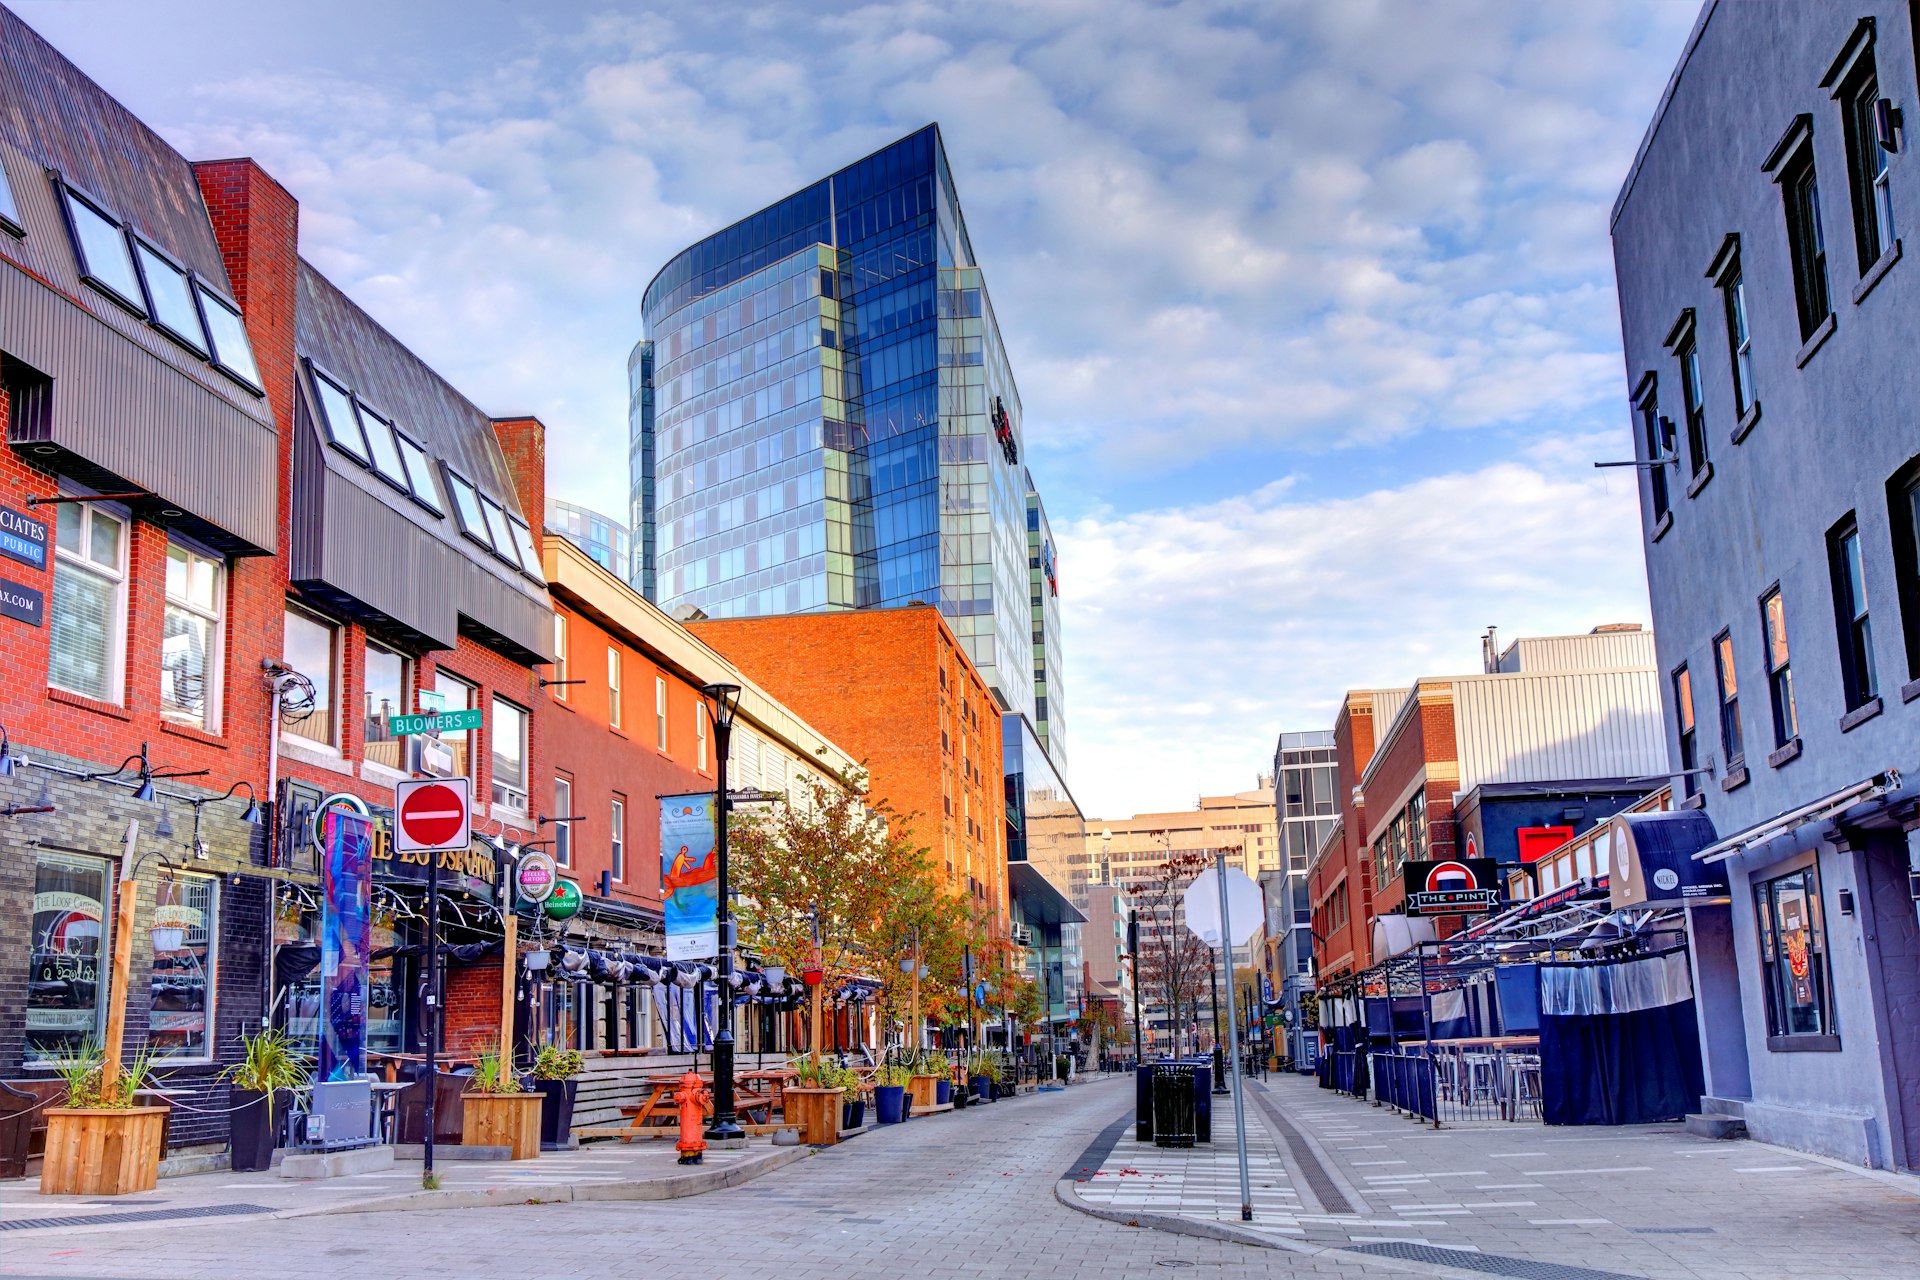 Argyle Street in Halifax, Nova Scotia, lined with bars and restaurants